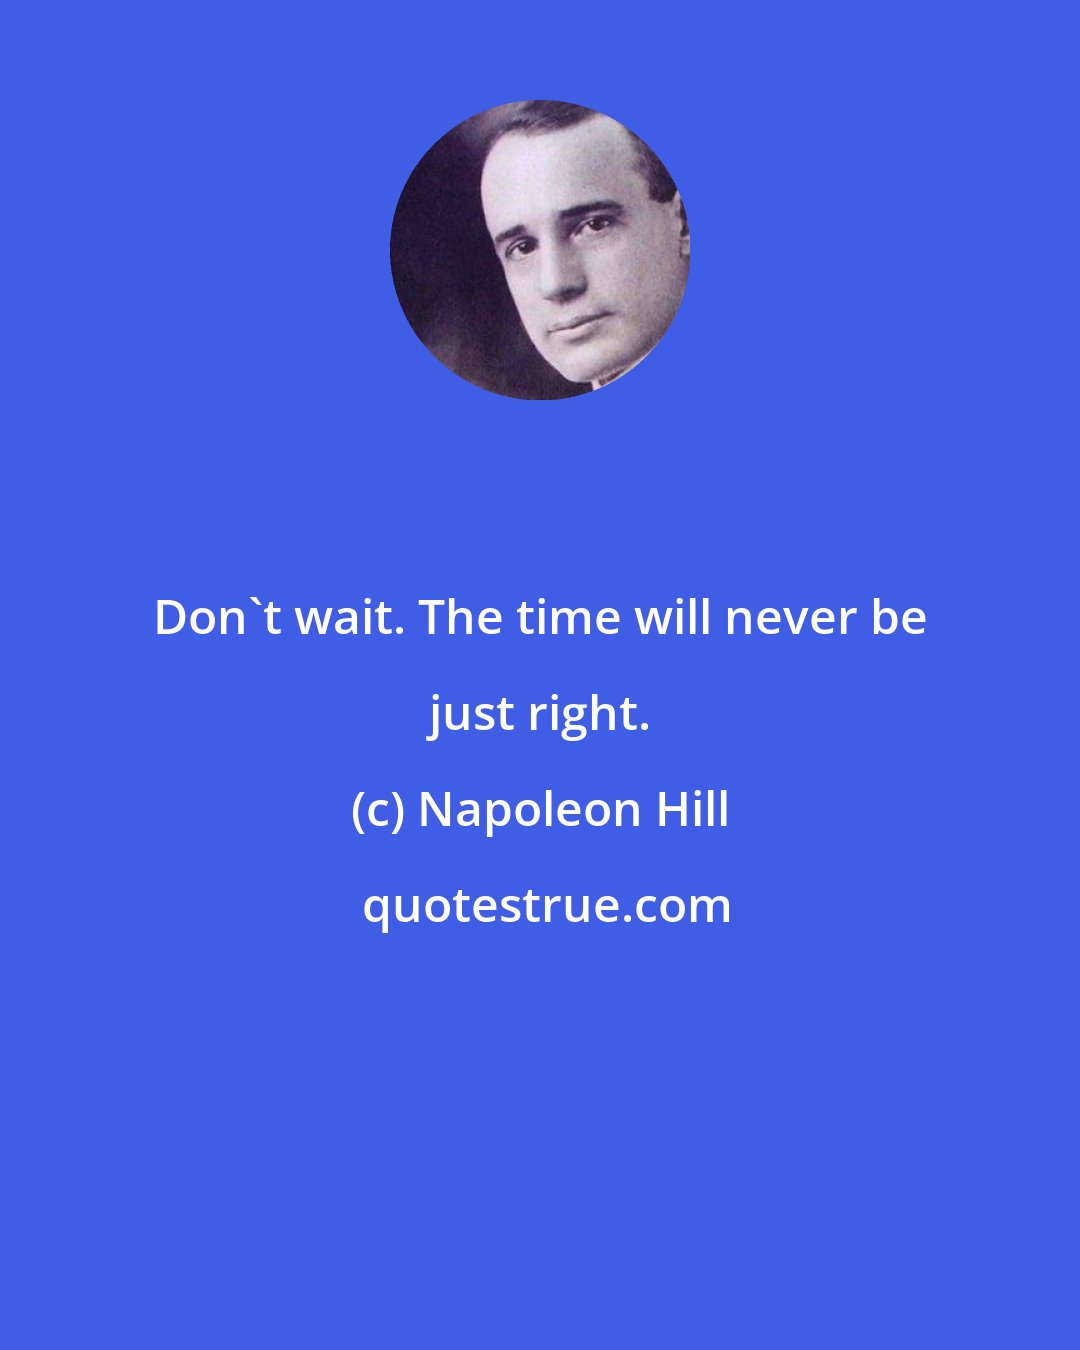 Napoleon Hill: Don't wait. The time will never be just right.